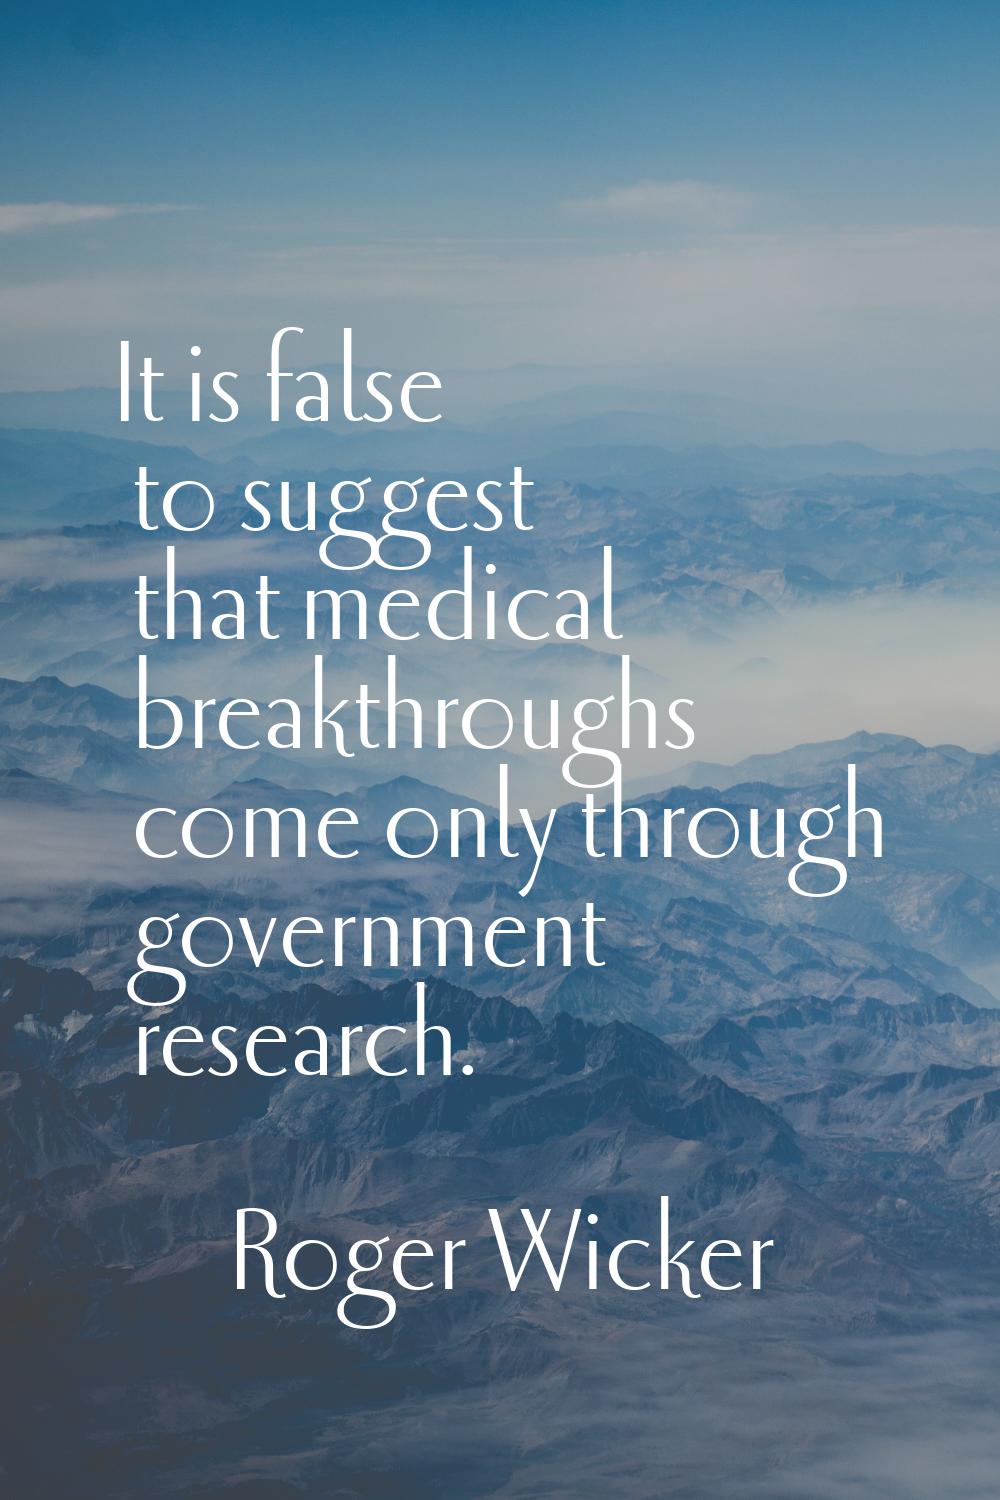 It is false to suggest that medical breakthroughs come only through government research.